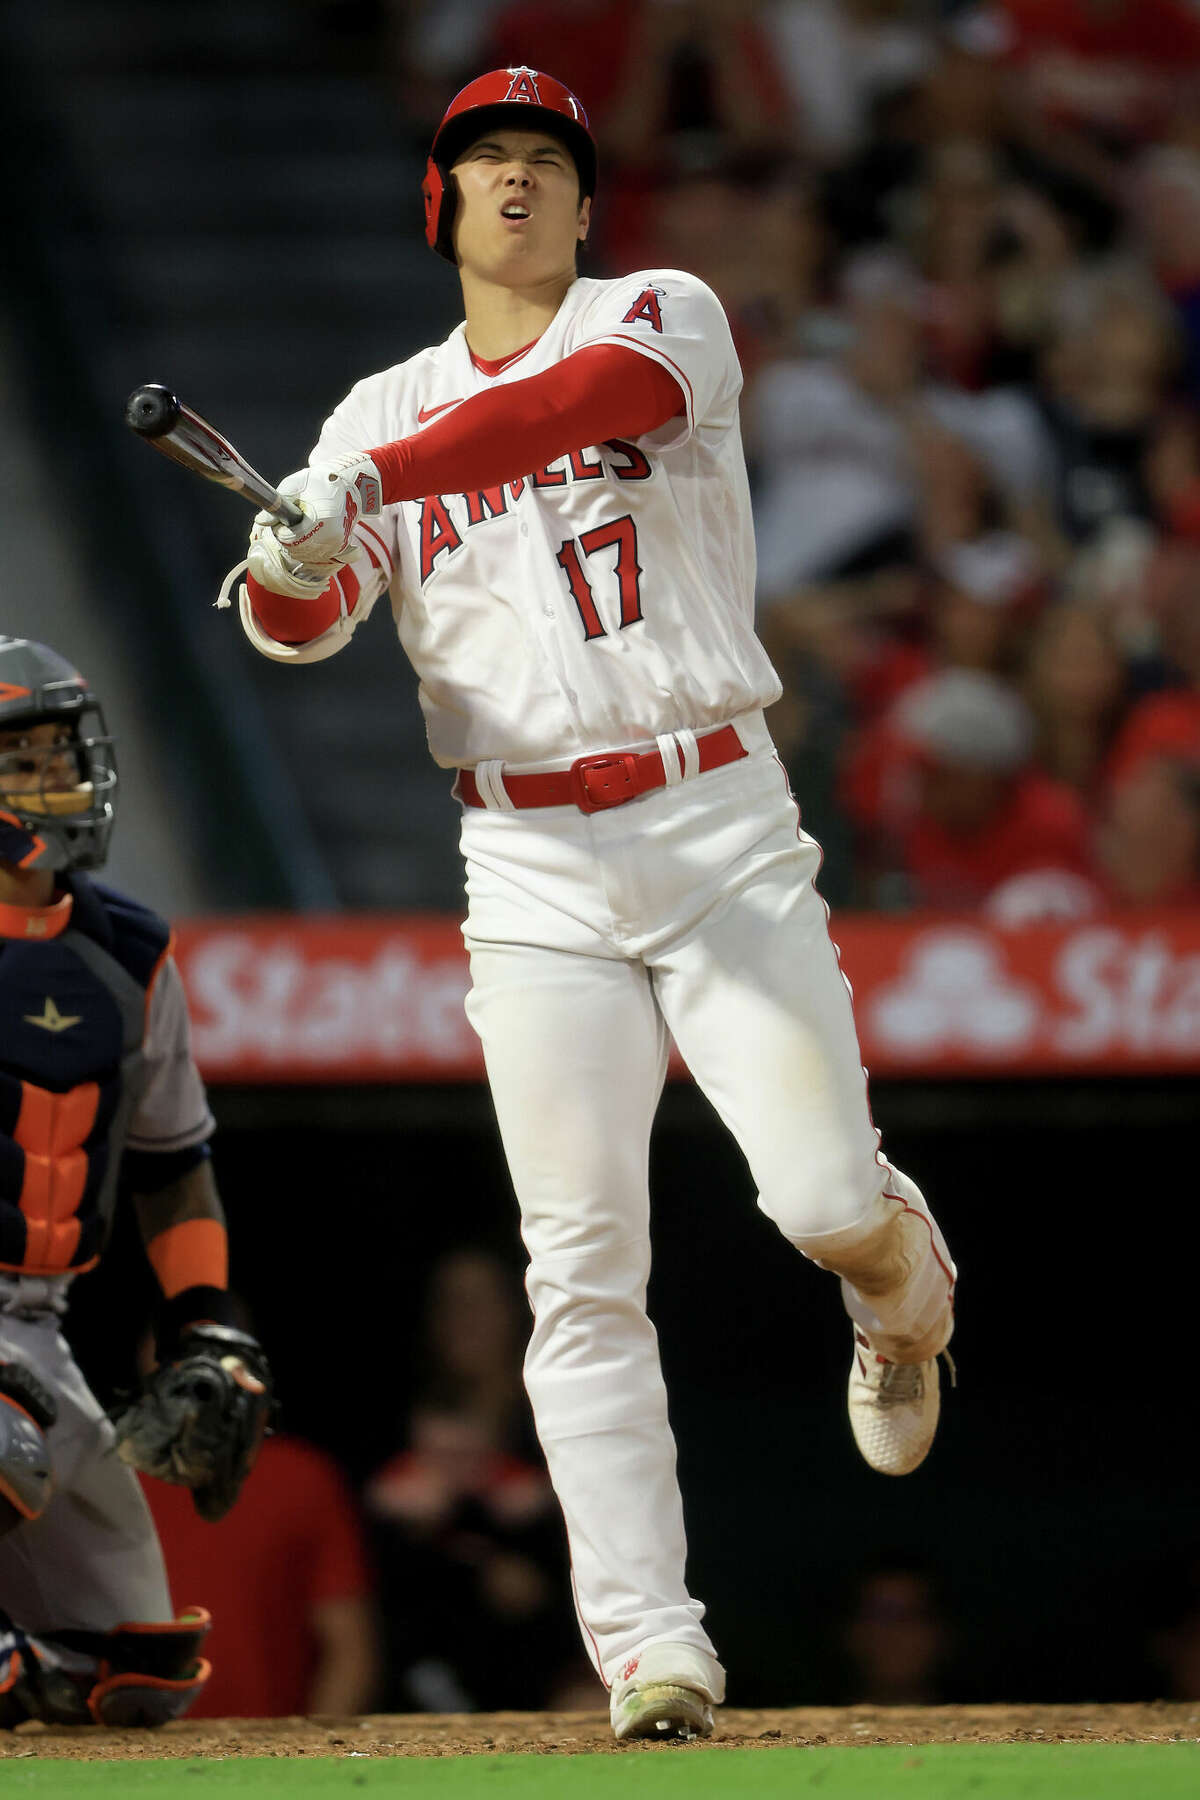 Ohtani, Drury lead Angels to 6-4 victory over Astros - ABC7 Los Angeles